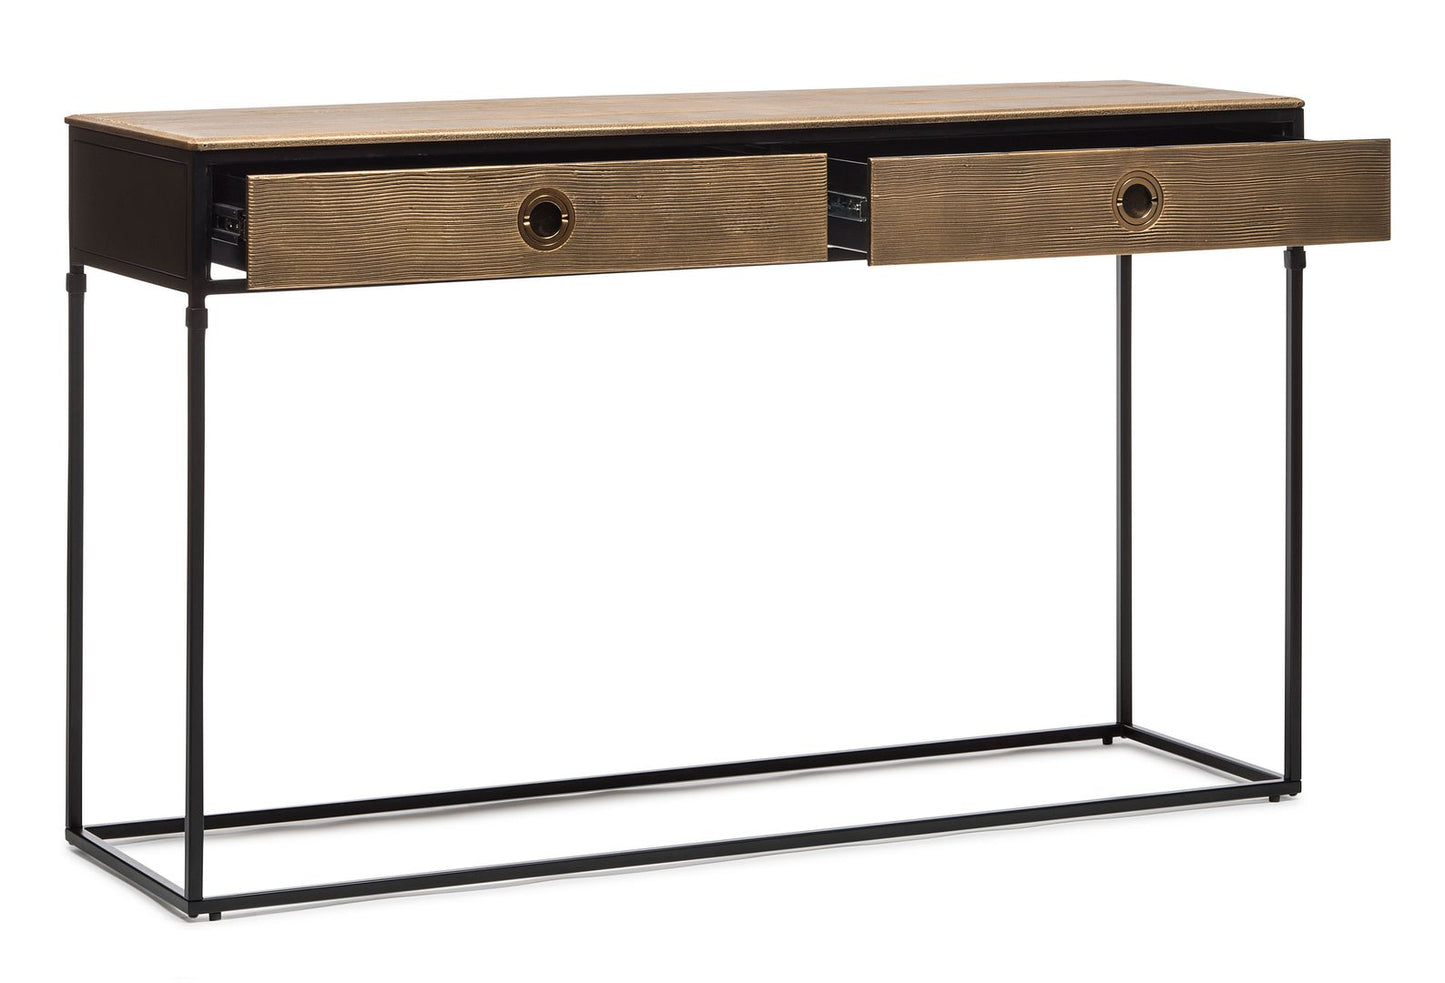 Contemporary Golden Black Hallway Console Table with Drawers